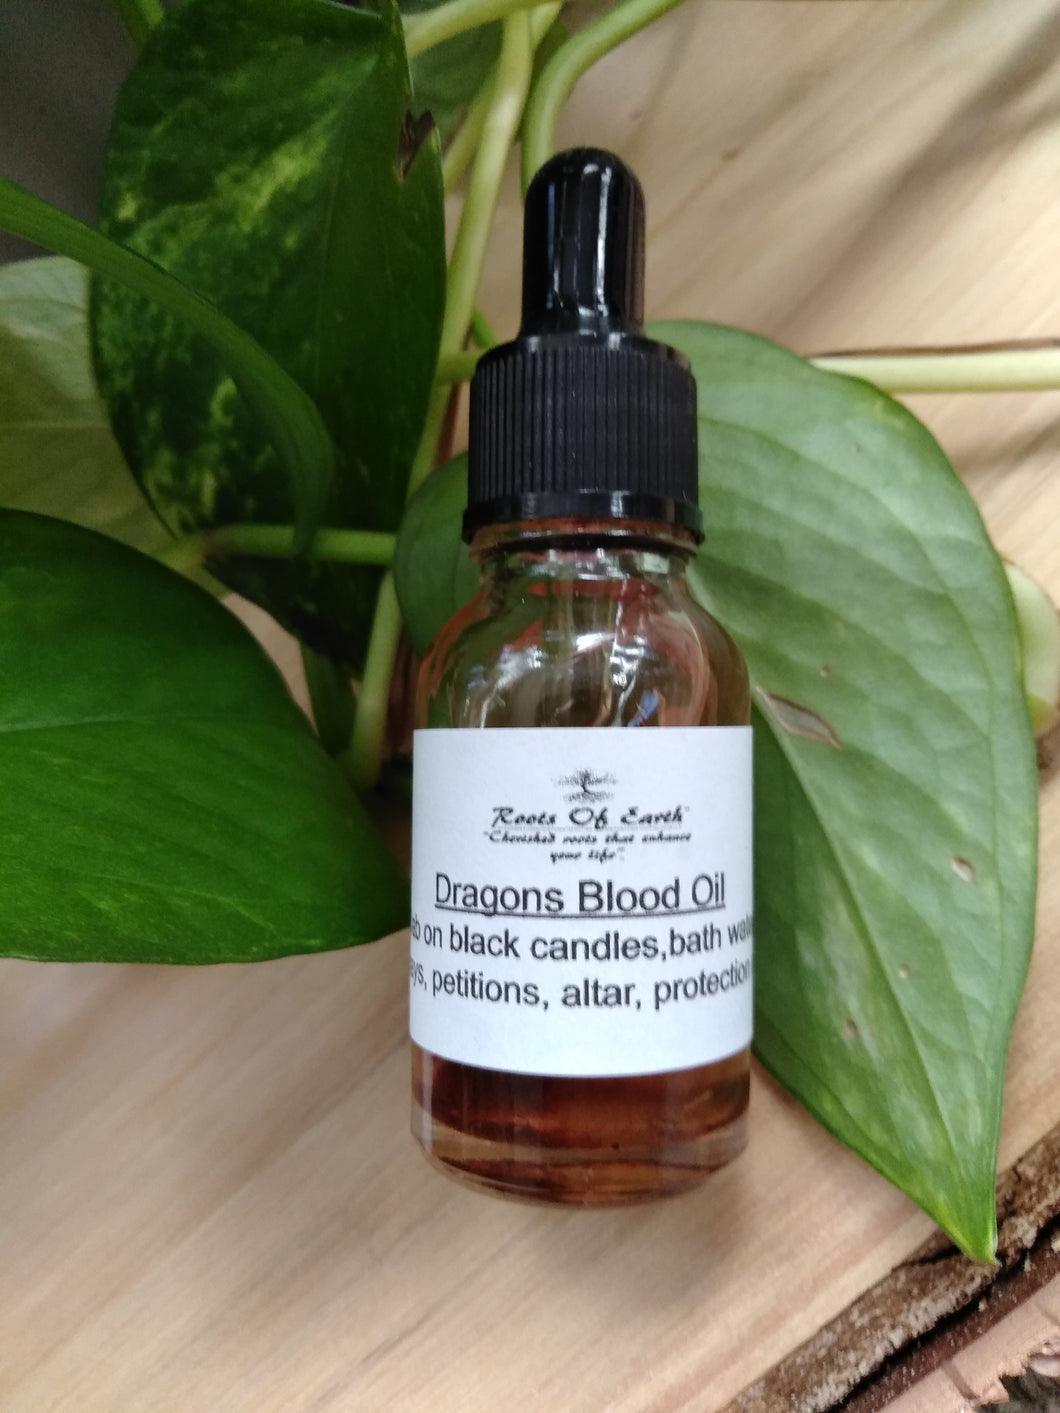 Dragons Blood Oil For Protections By Roots Of Earth